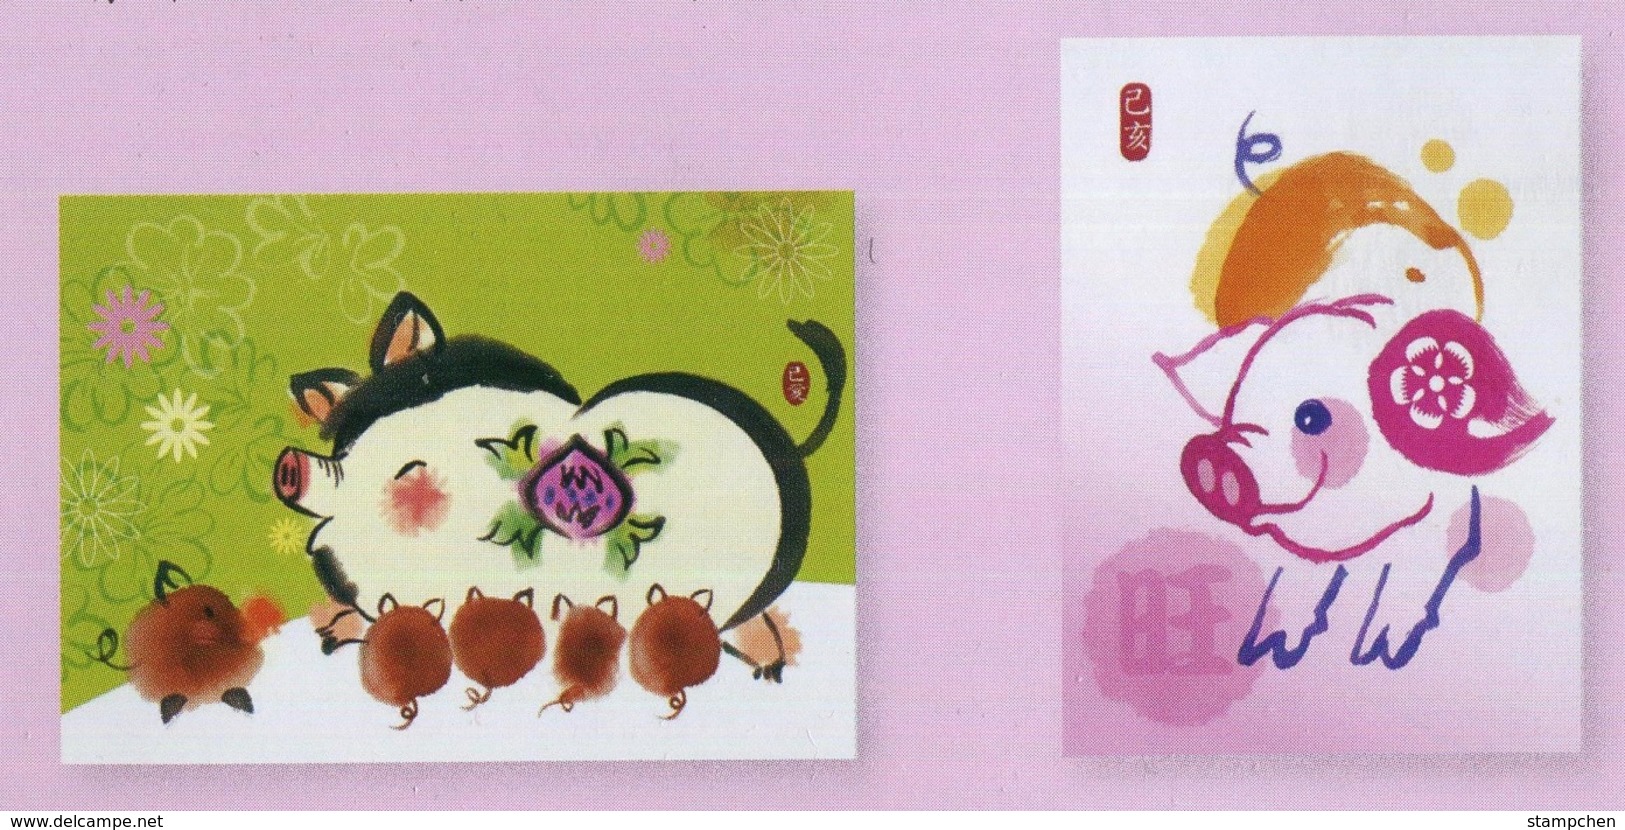 Taiwan Pre-stamp Postal Cards 2018 Chinese New Year Zodiac Boar 2019 Pig Flower - Postal Stationery